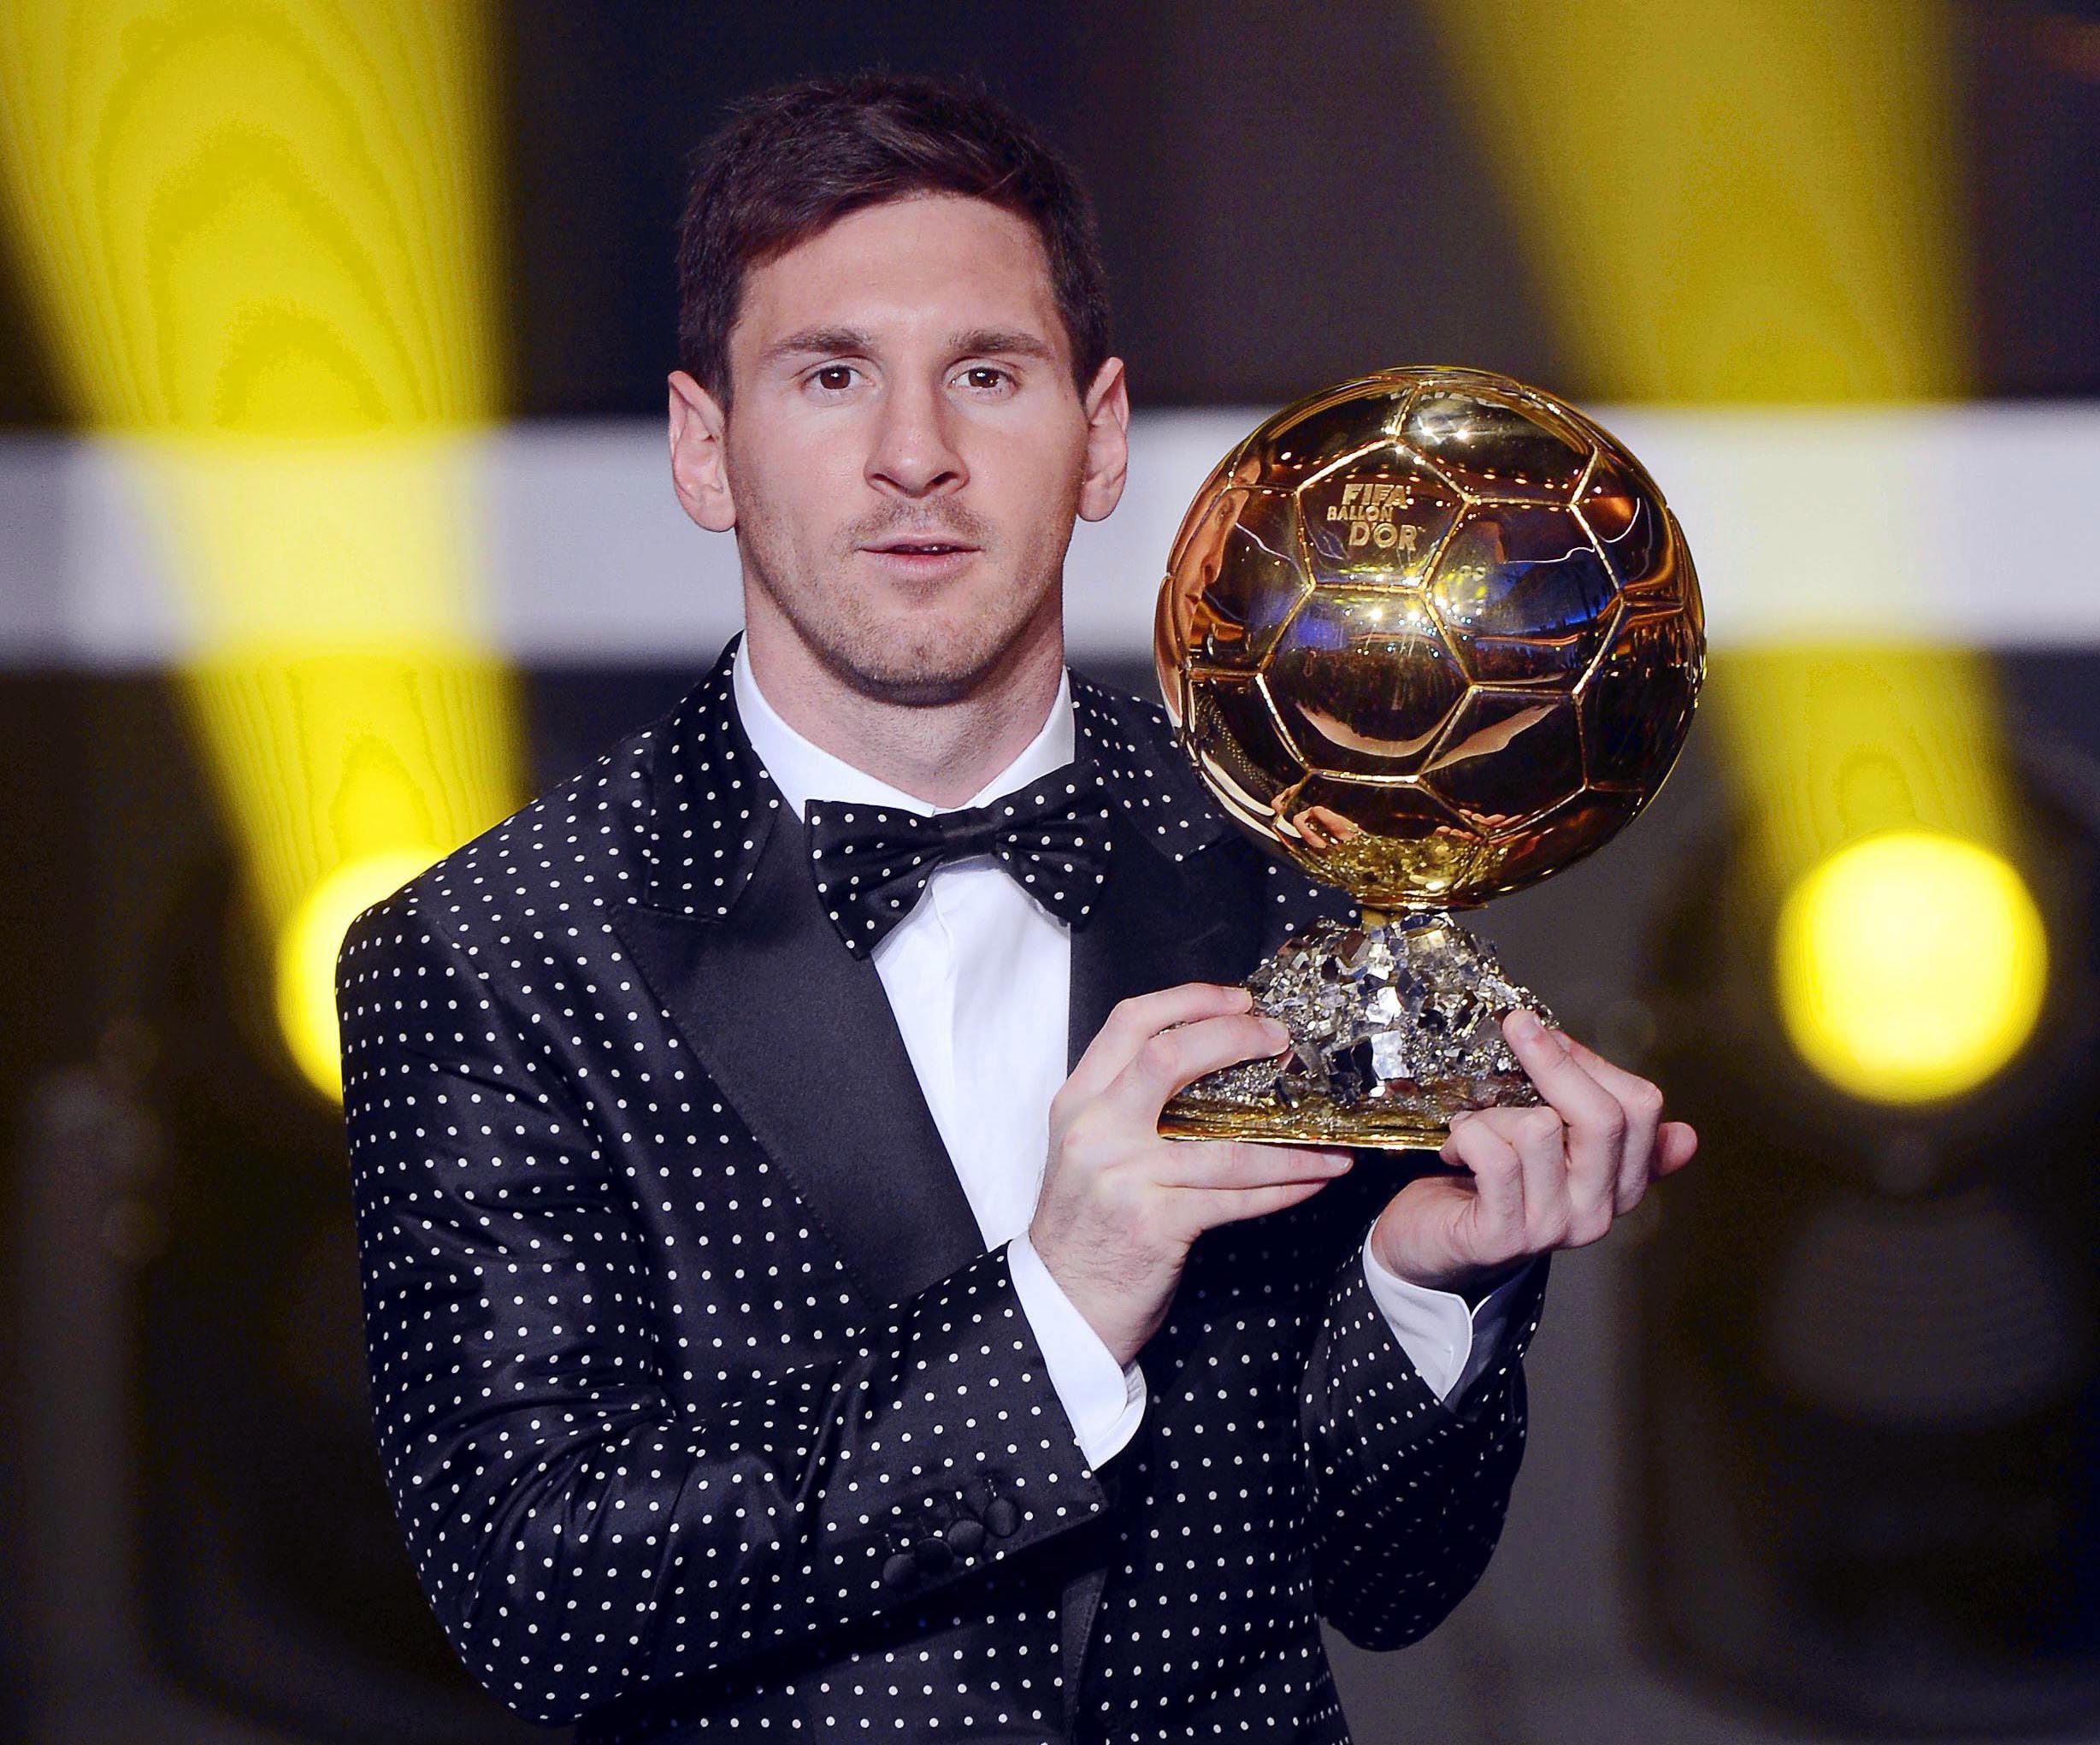 Lionel Messi, who has won the award seven times, is considered one of the greatest footballers of all time